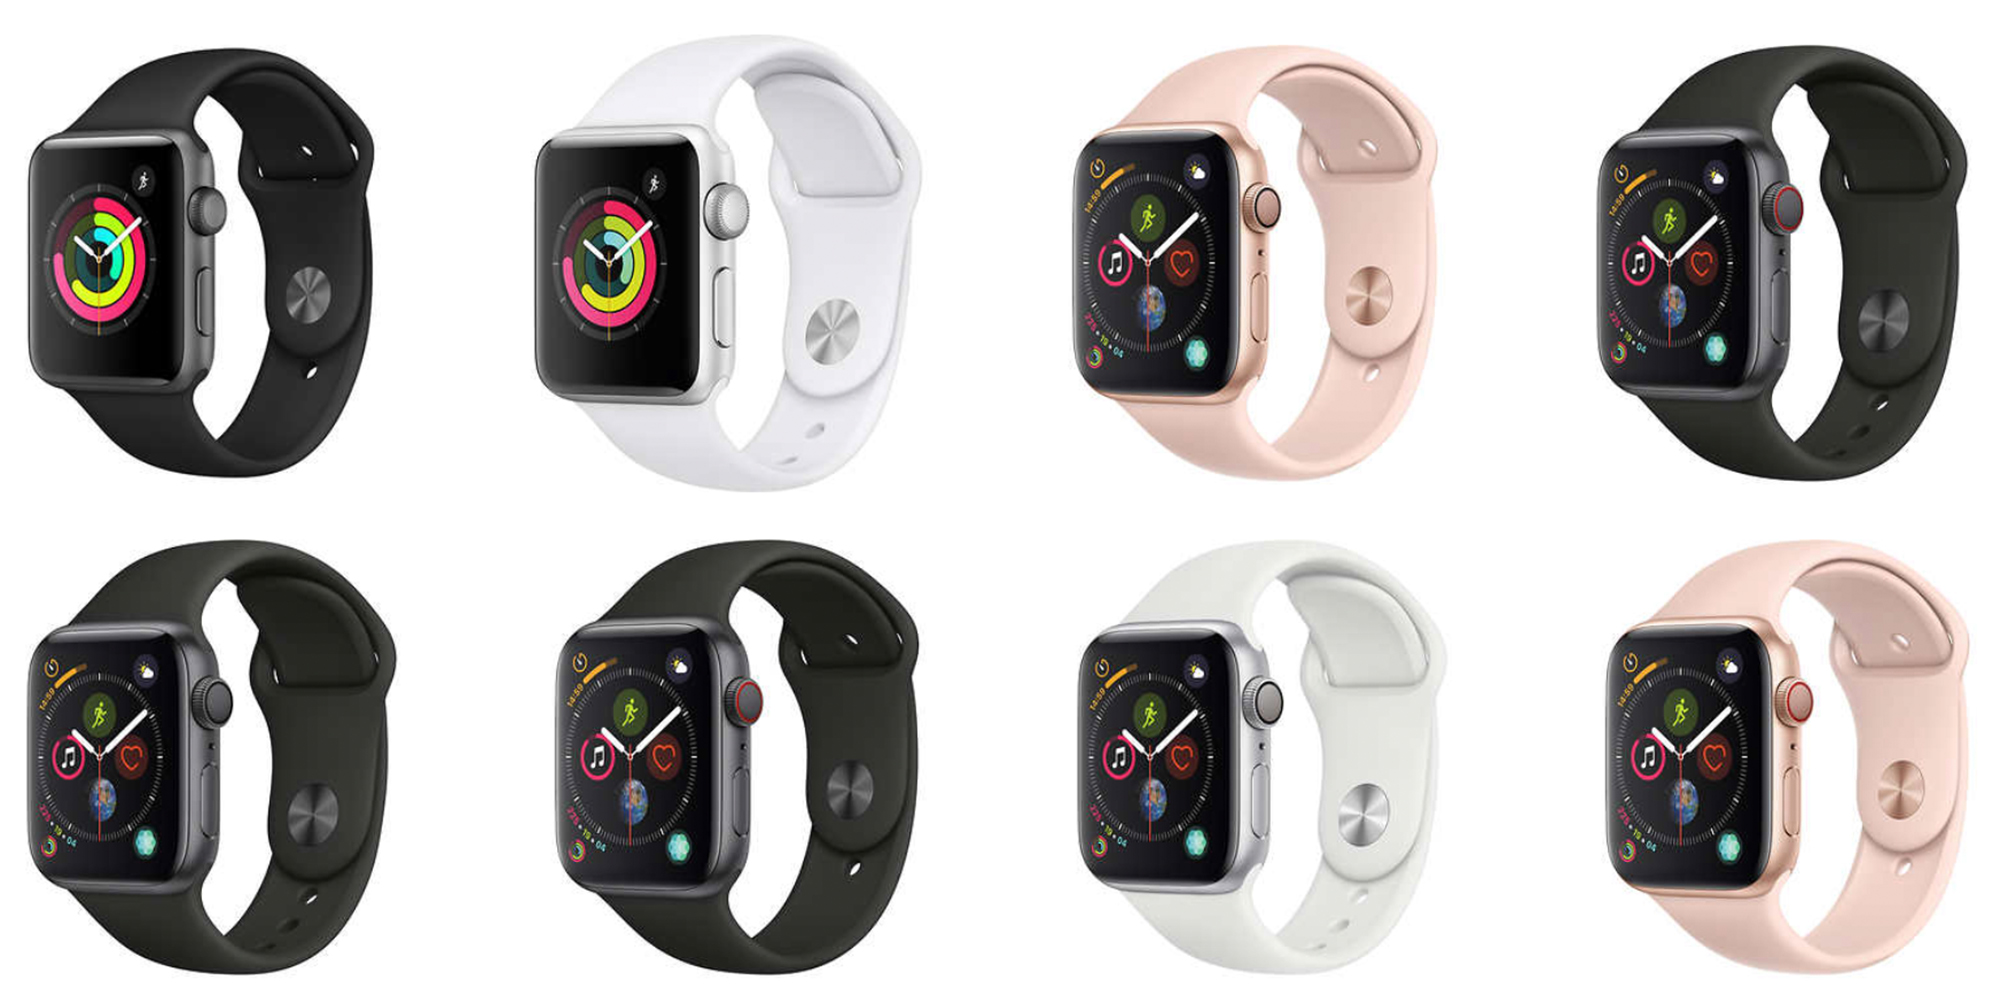 Apple Watch deals abound this morning w/ Series 3 from $230 